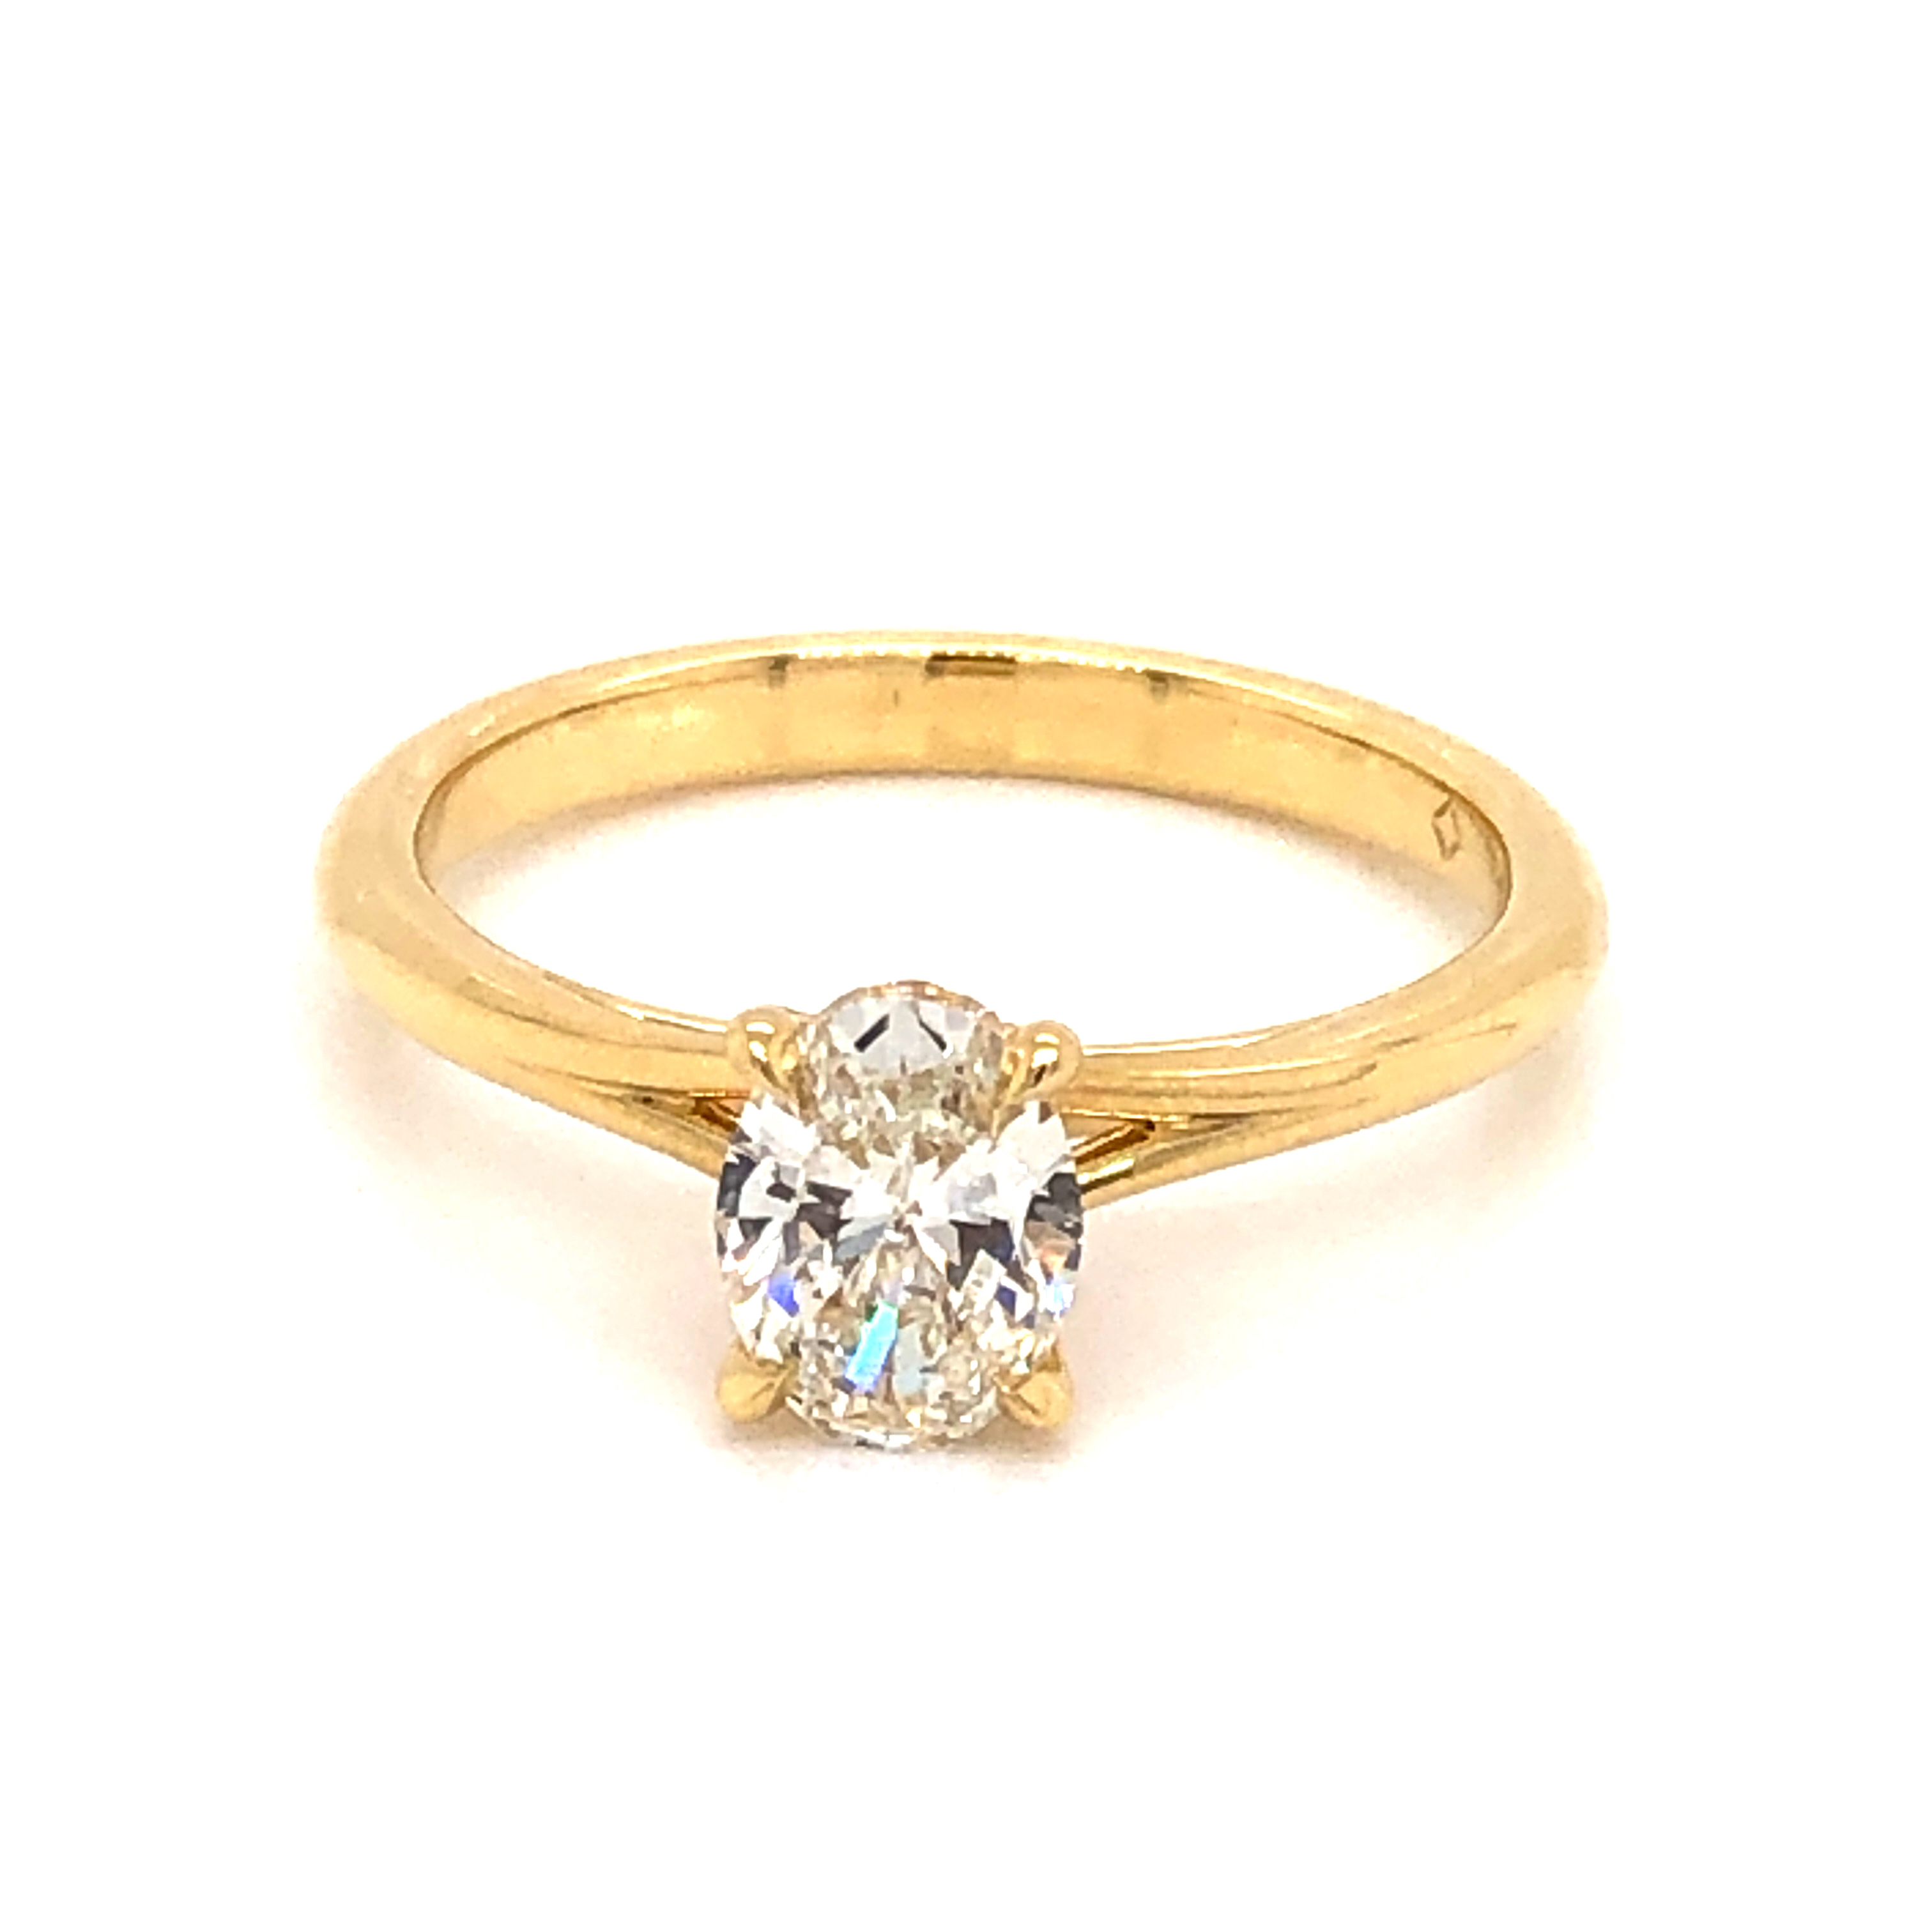 18 Karat yellow gold engagement ring Size 6.5 with One 0.70Ct Oval J VS2 Diamond and 14=0.04ctw Round Brilliant G VS Diamonds  dwt: 2